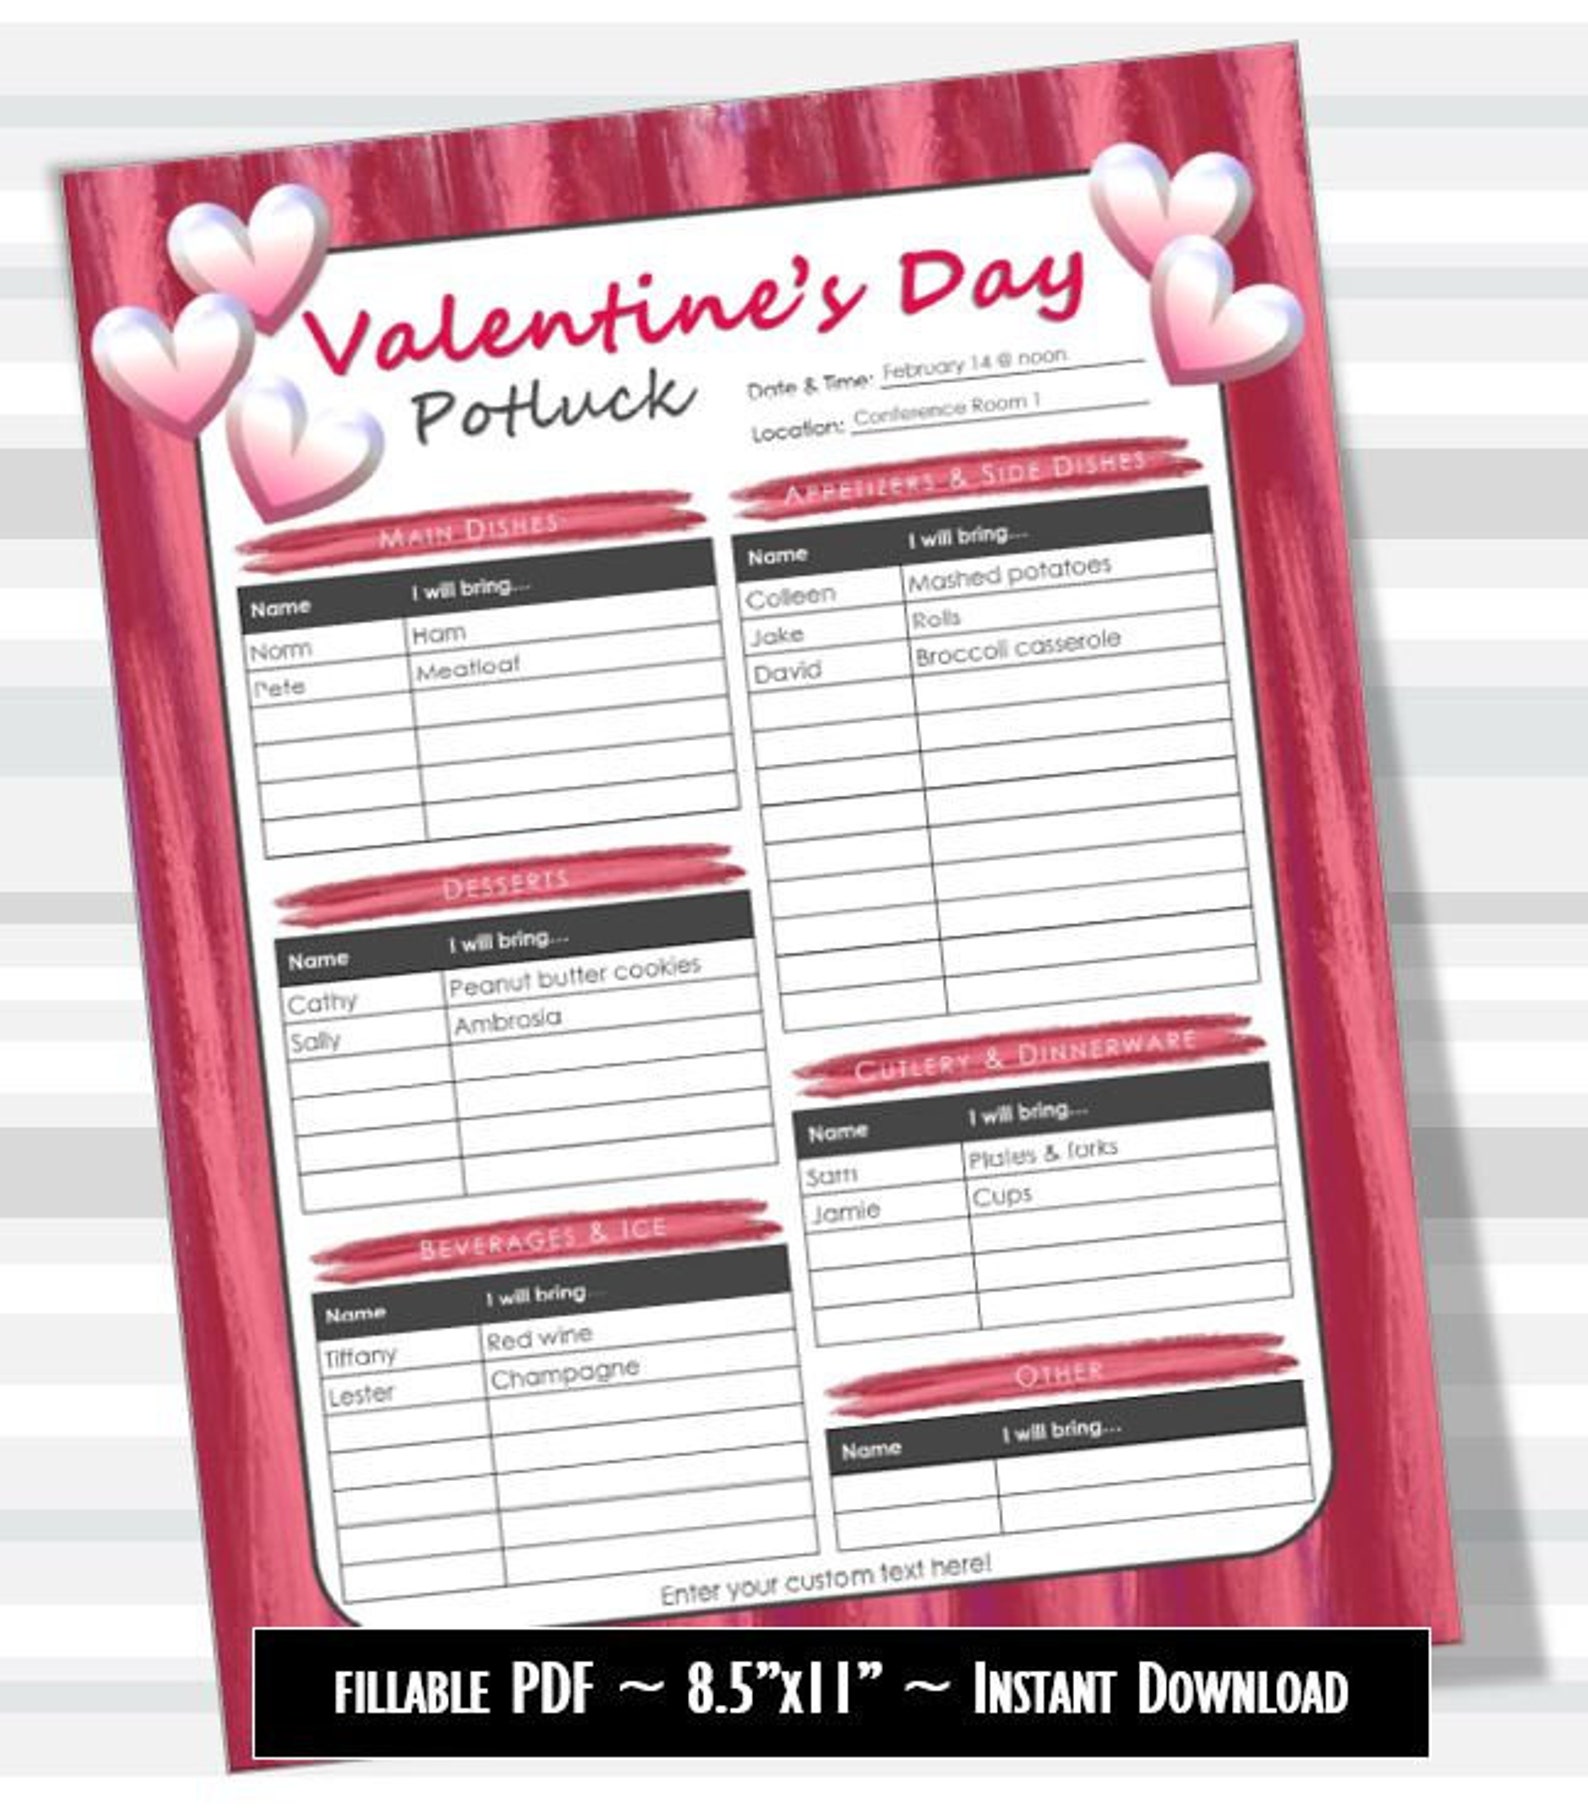 valentine-s-day-printable-potluck-sign-up-sheet-8-5x11-etsy